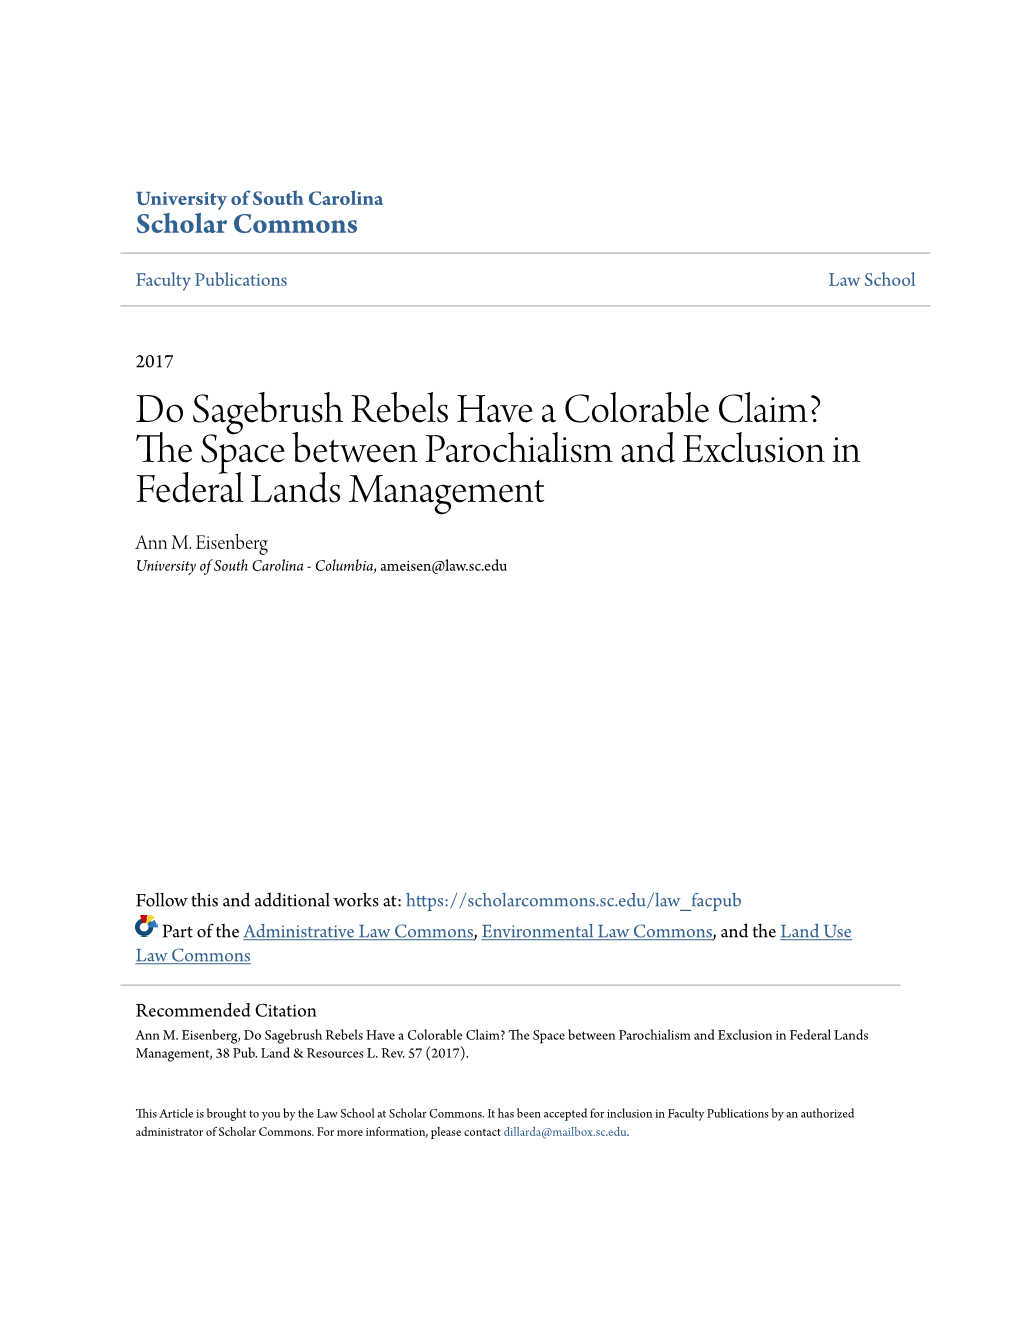 Do Sagebrush Rebels Have a Colorable Claim? the Ps Ace Between Parochialism and Exclusion in Federal Lands Management Ann M